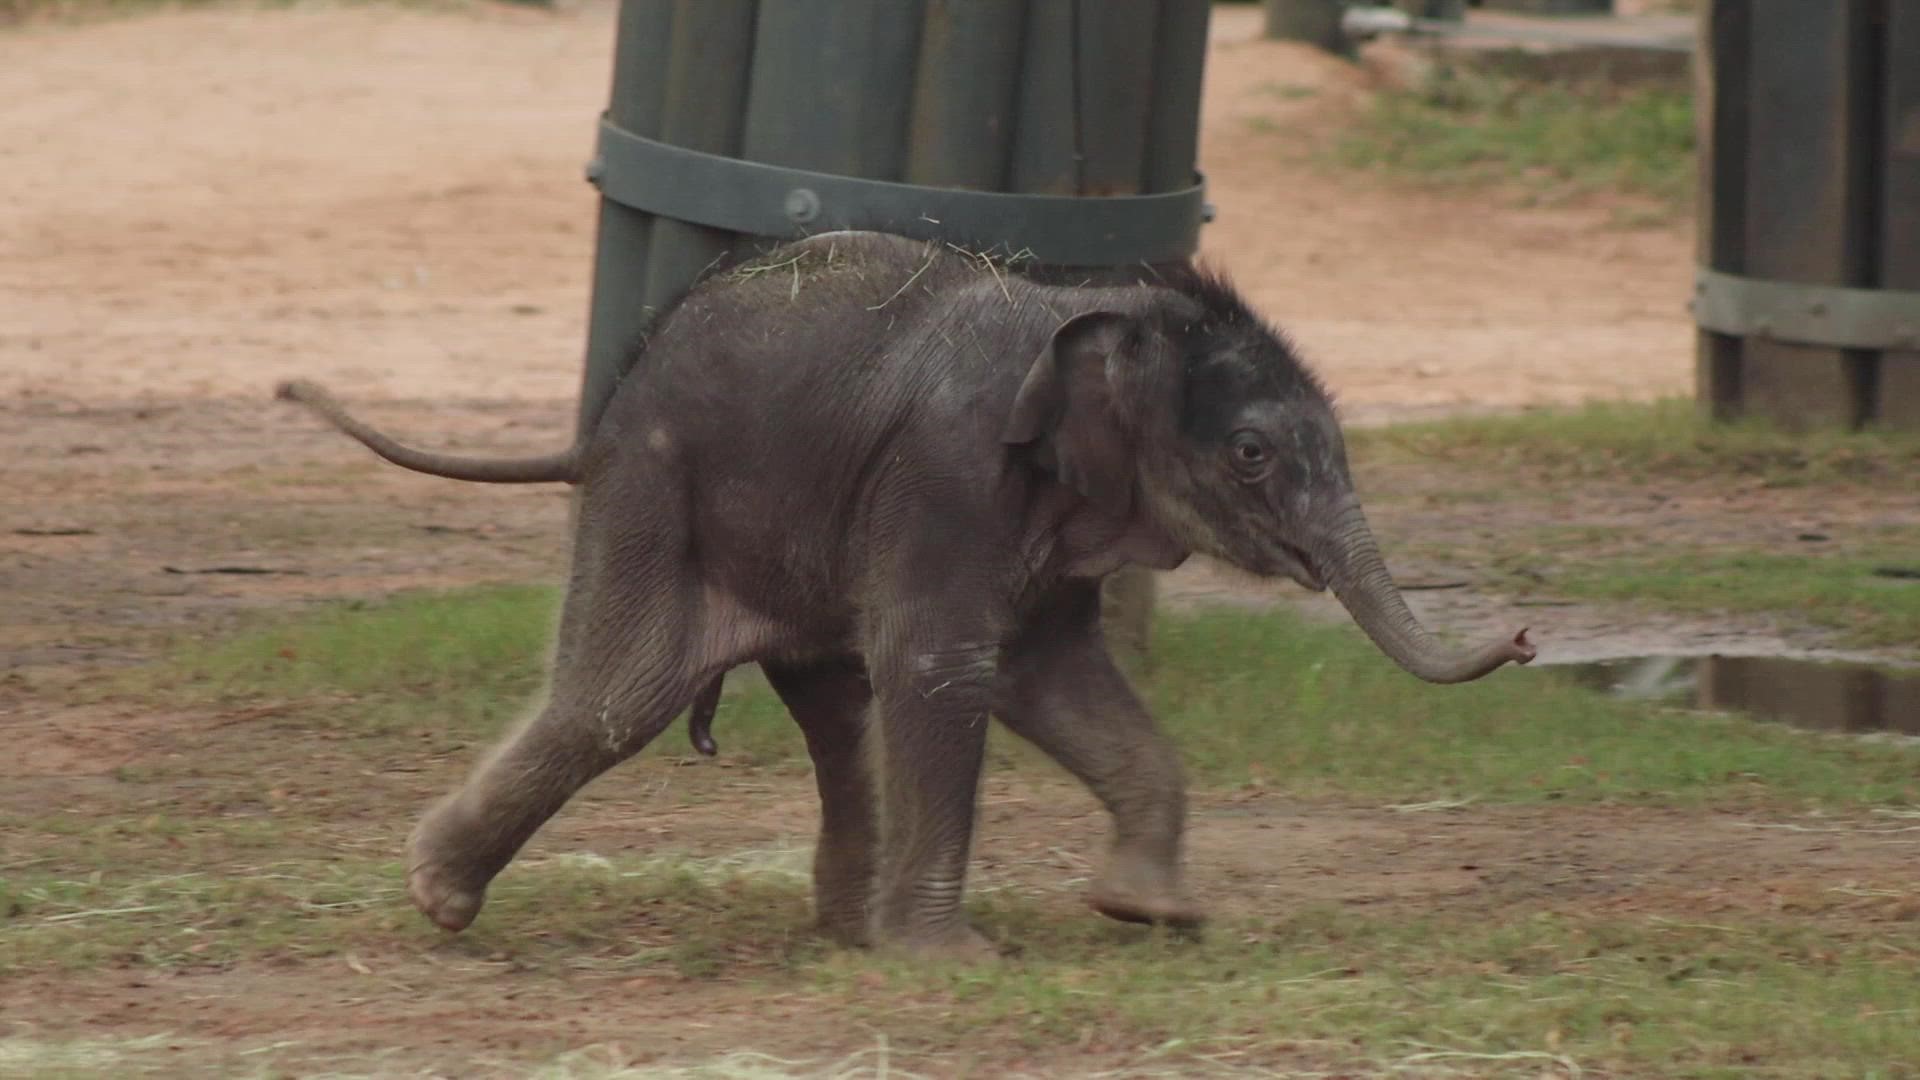 The Fort Worth Zoo welcomes Brazos, its latest baby elephant! Video courtesy of the Fort Worth Zoo.